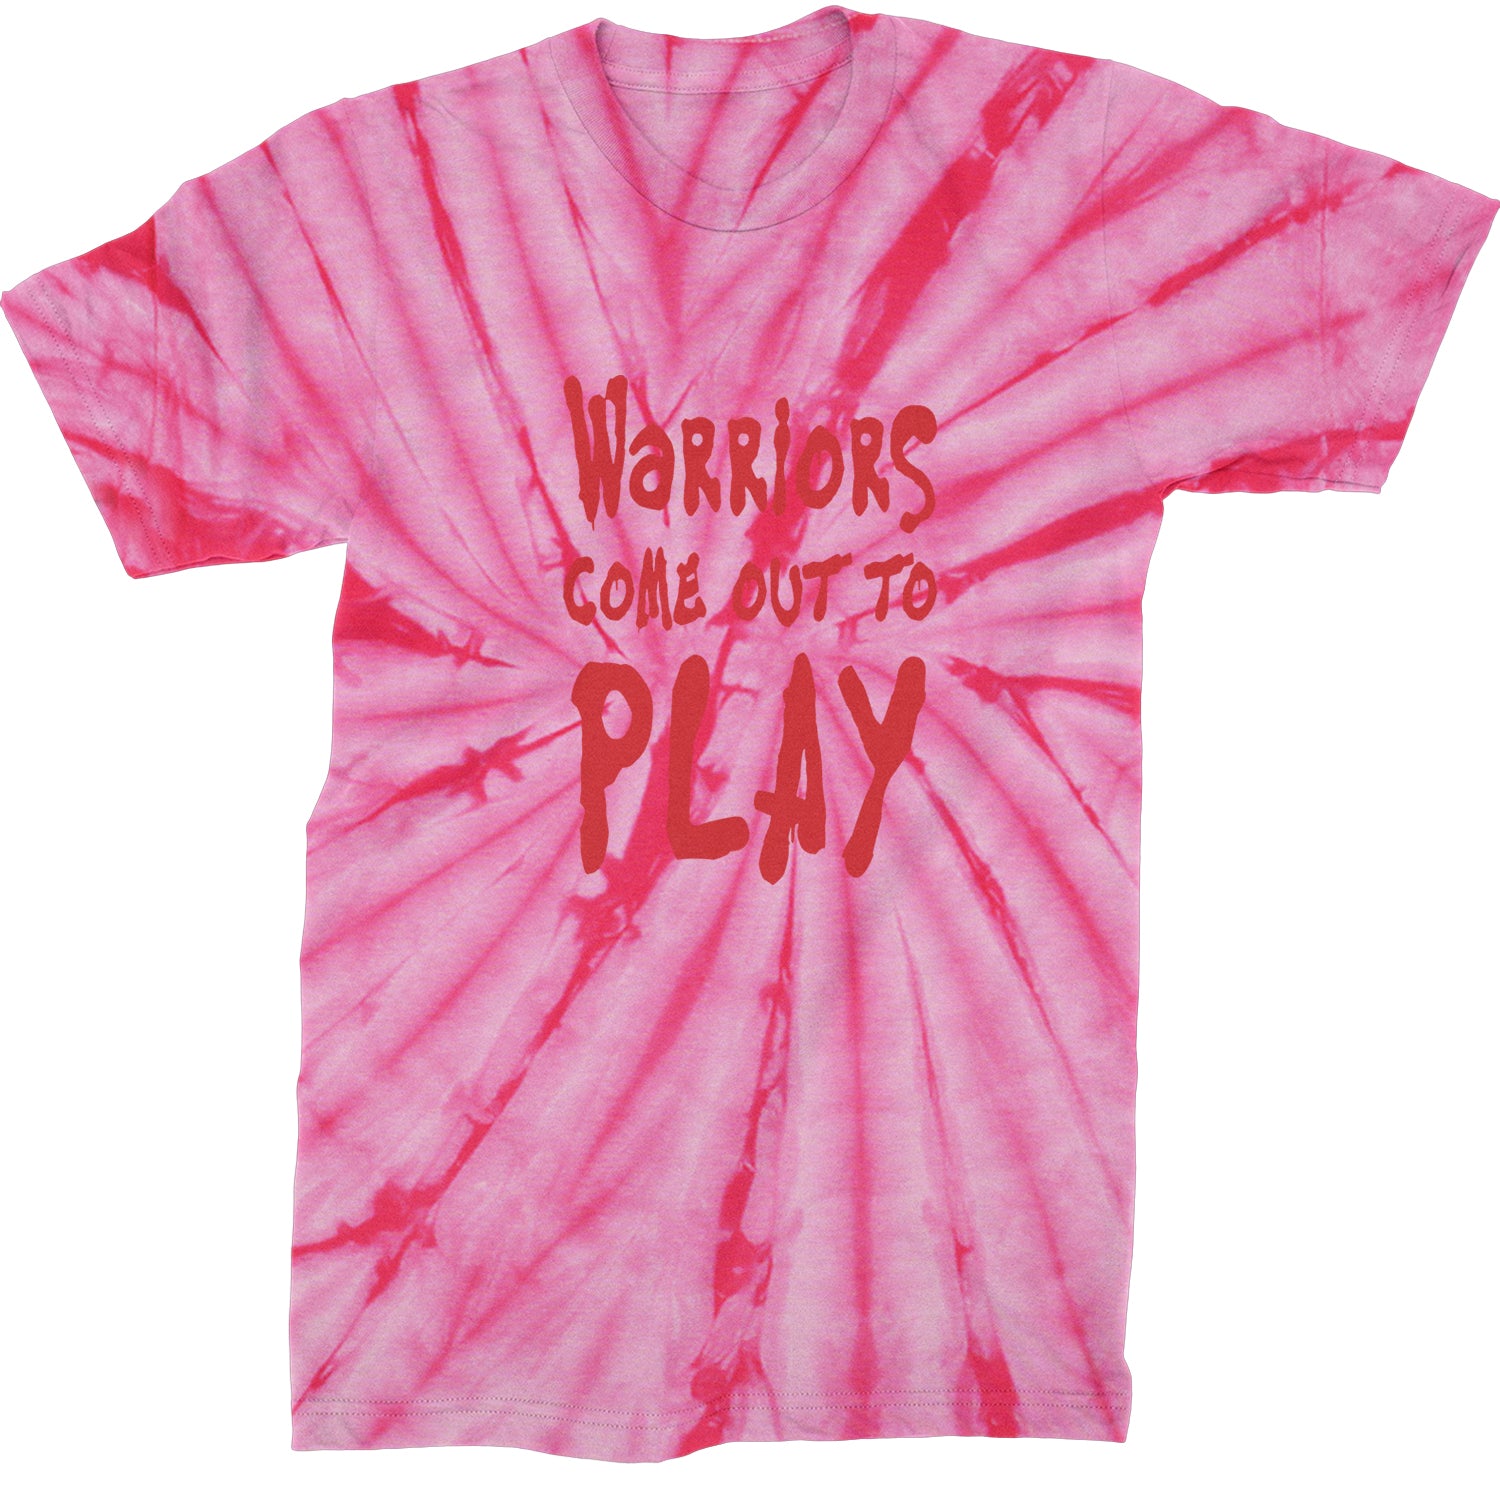 Warriors Come Out To Play  Mens T-shirt Tie-Dye Spider Pink